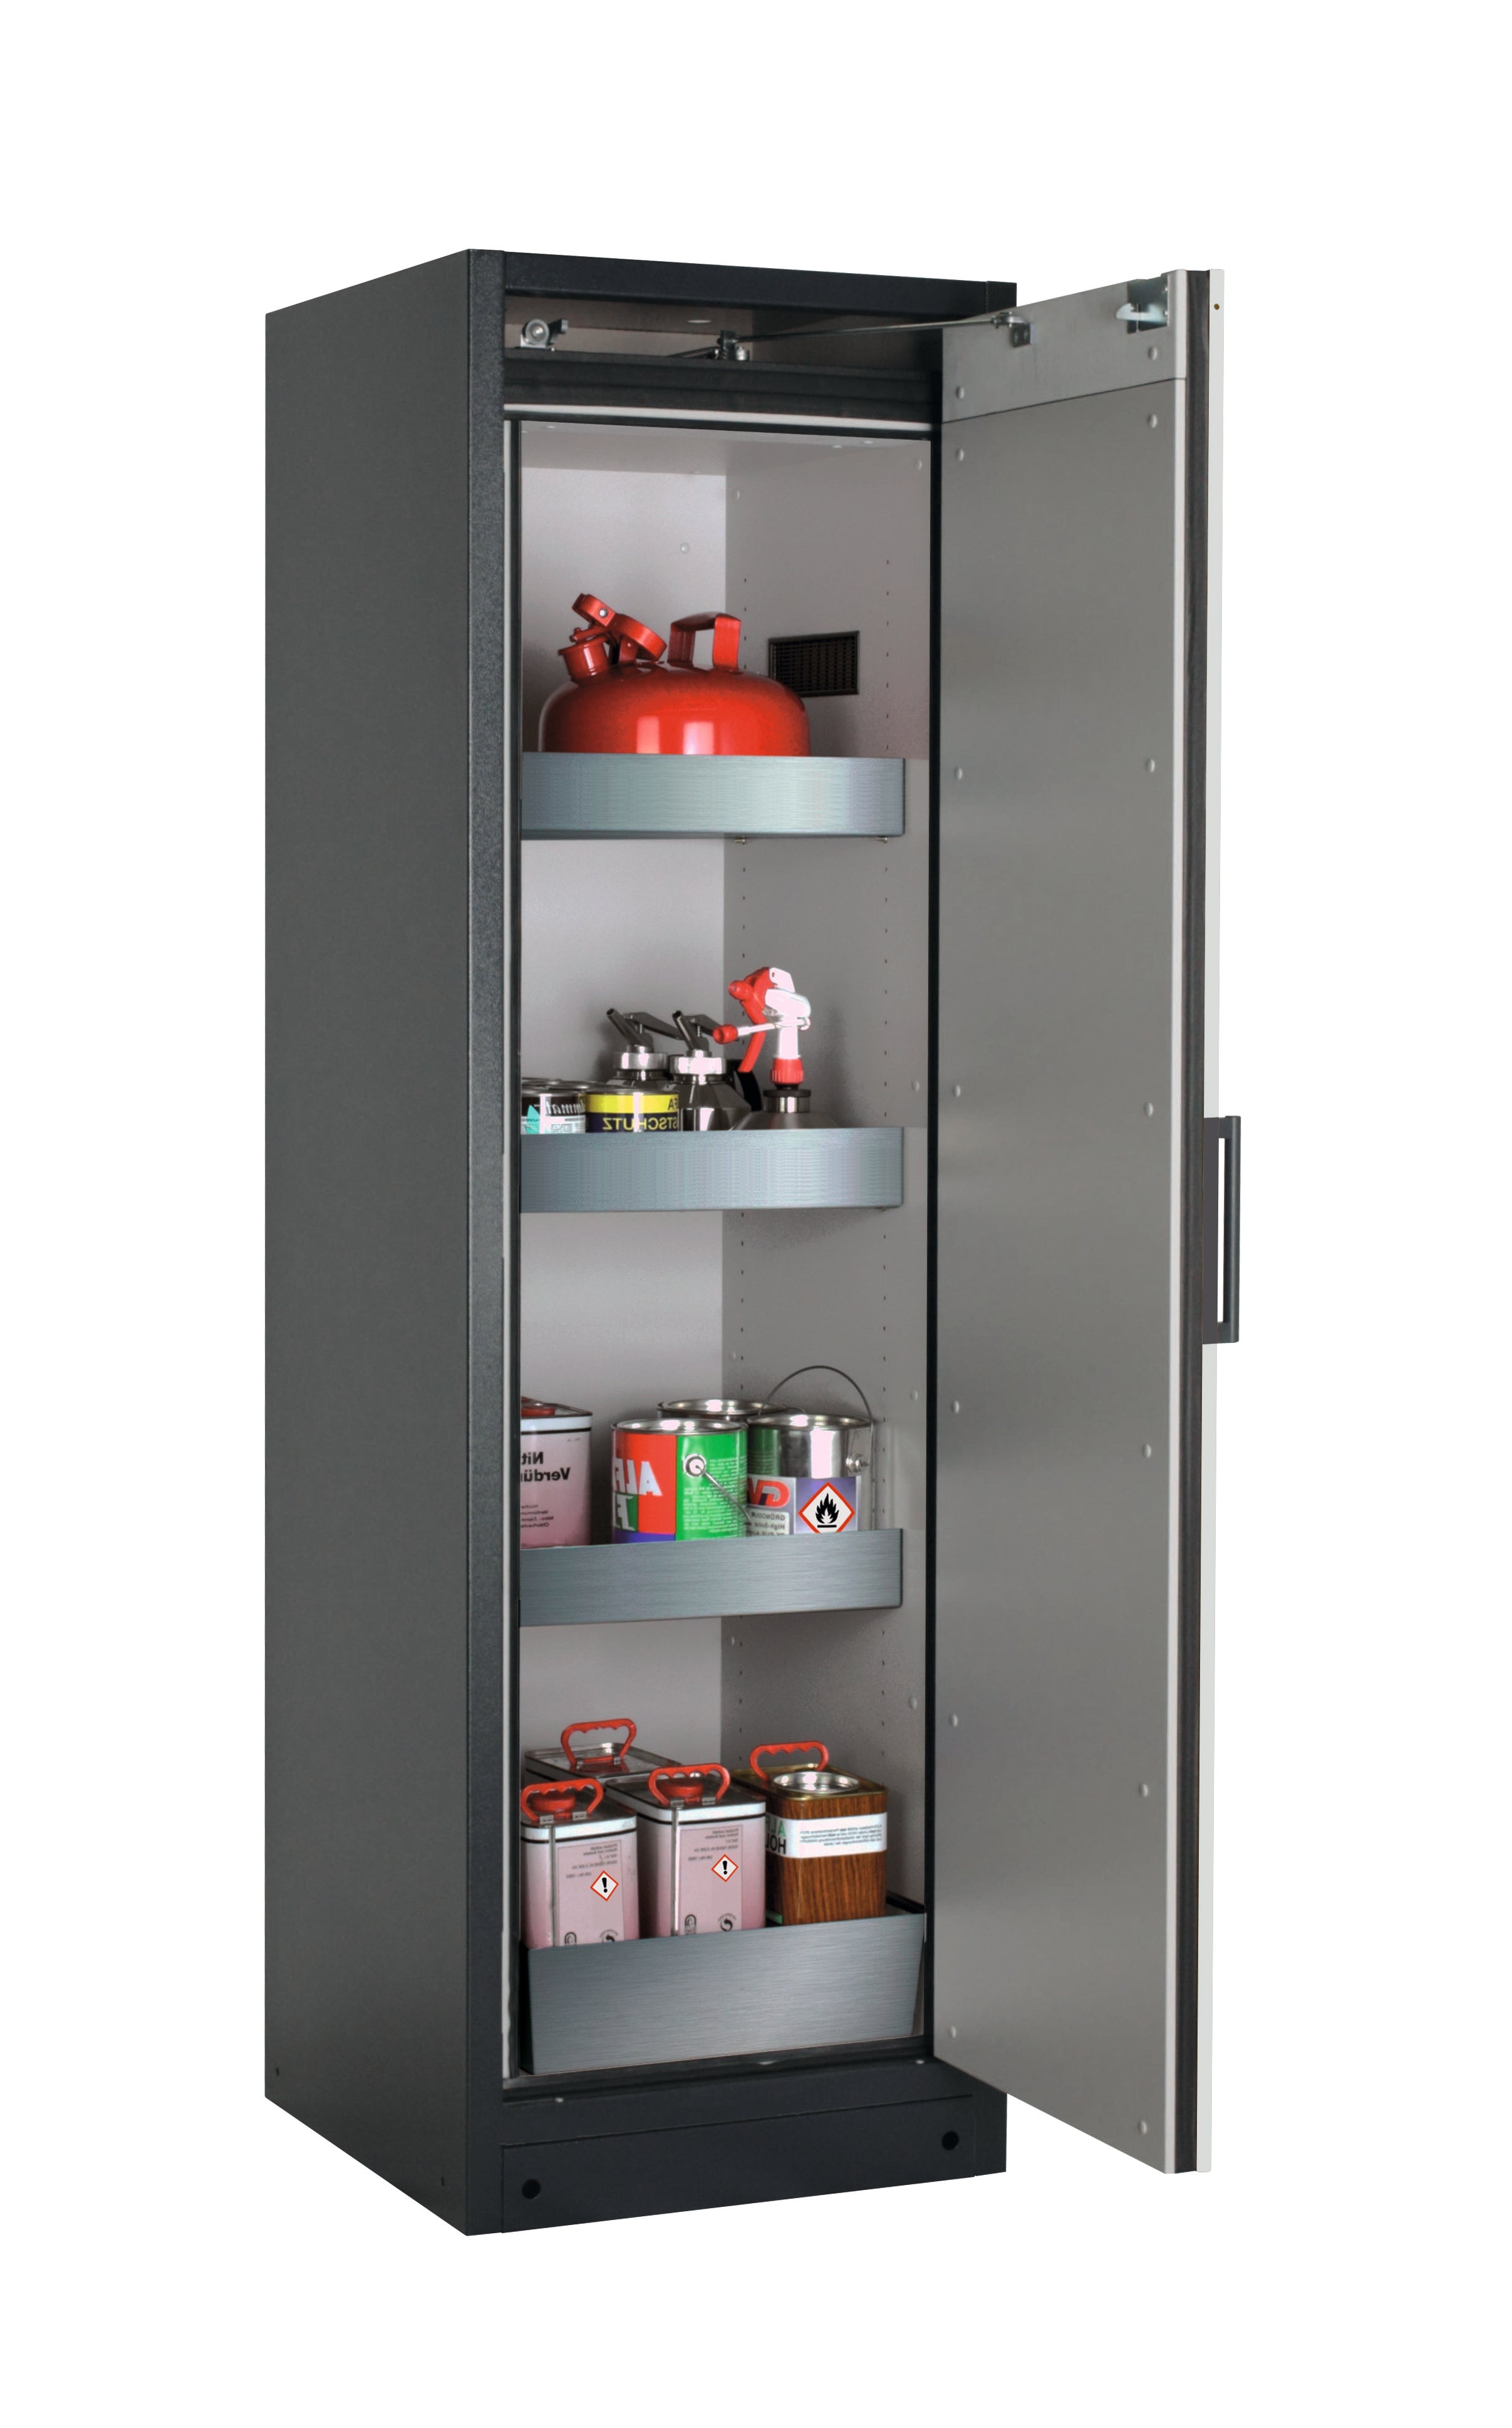 Type 90 safety storage cabinet Q-CLASSIC-90 model Q90.195.060.R in light grey RAL 7035 with 3x tray shelf (standard) (stainless steel 1.4301),